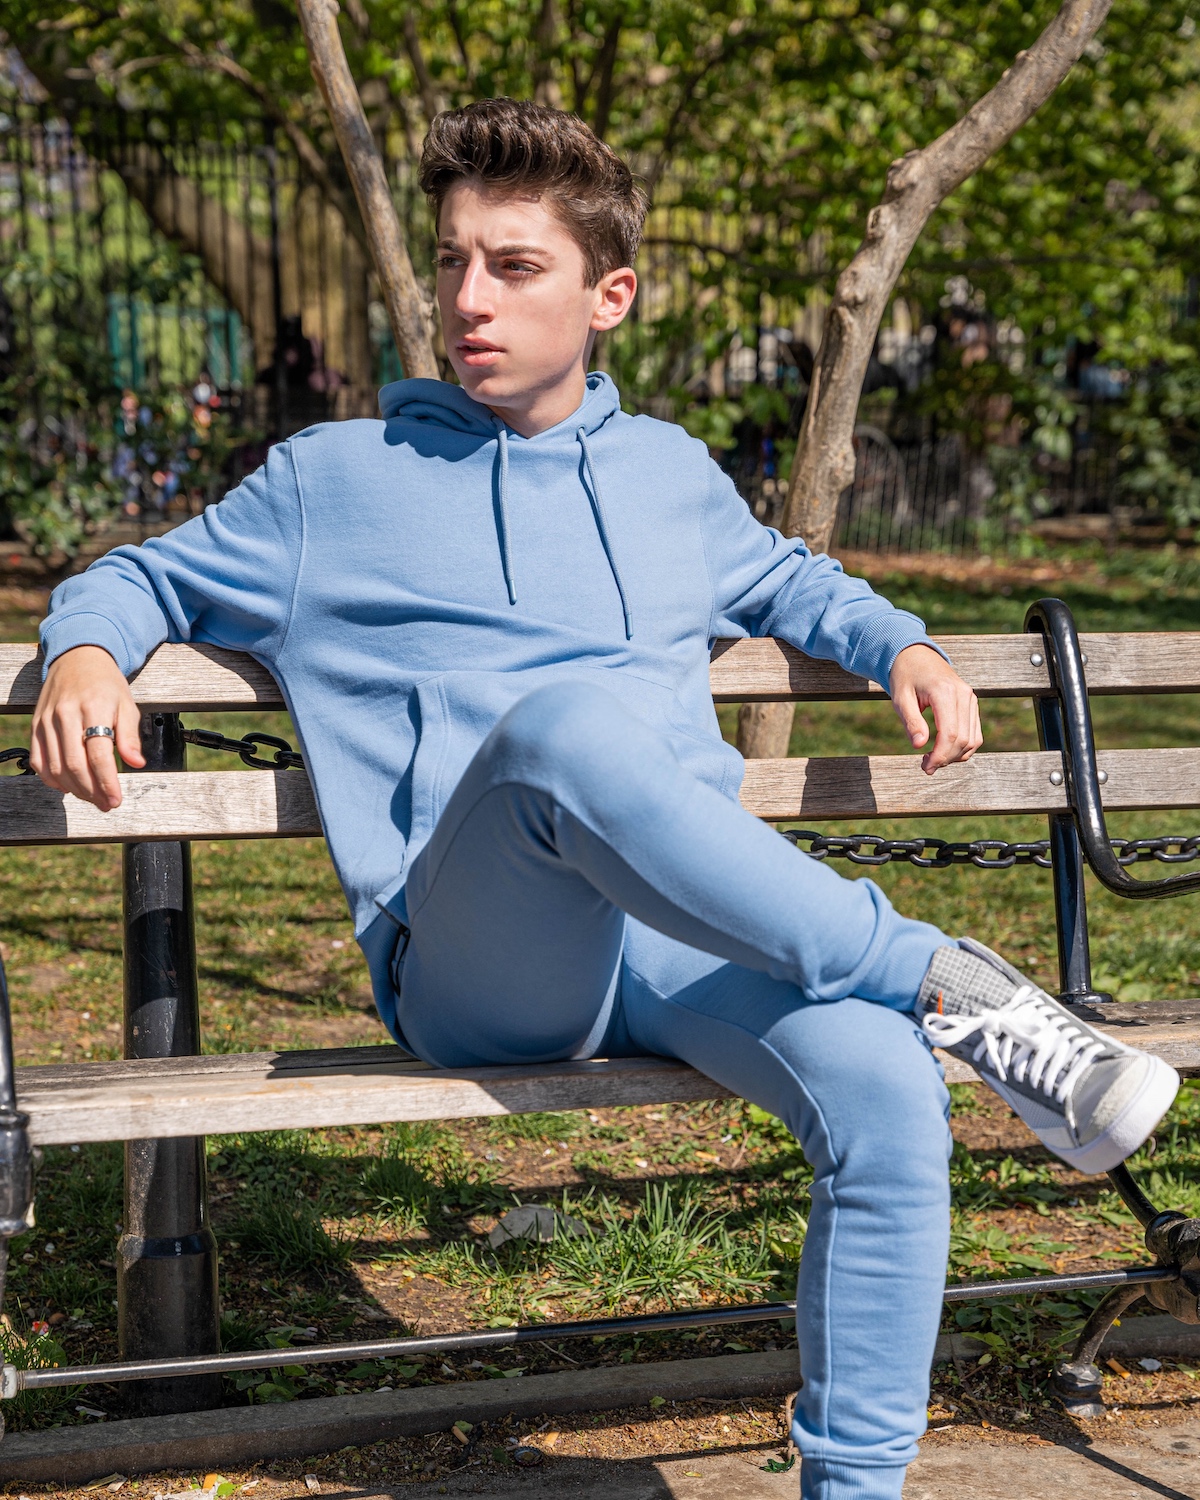 Eitan sits in a blue Topman sweatsuit on a park bench in NYC.